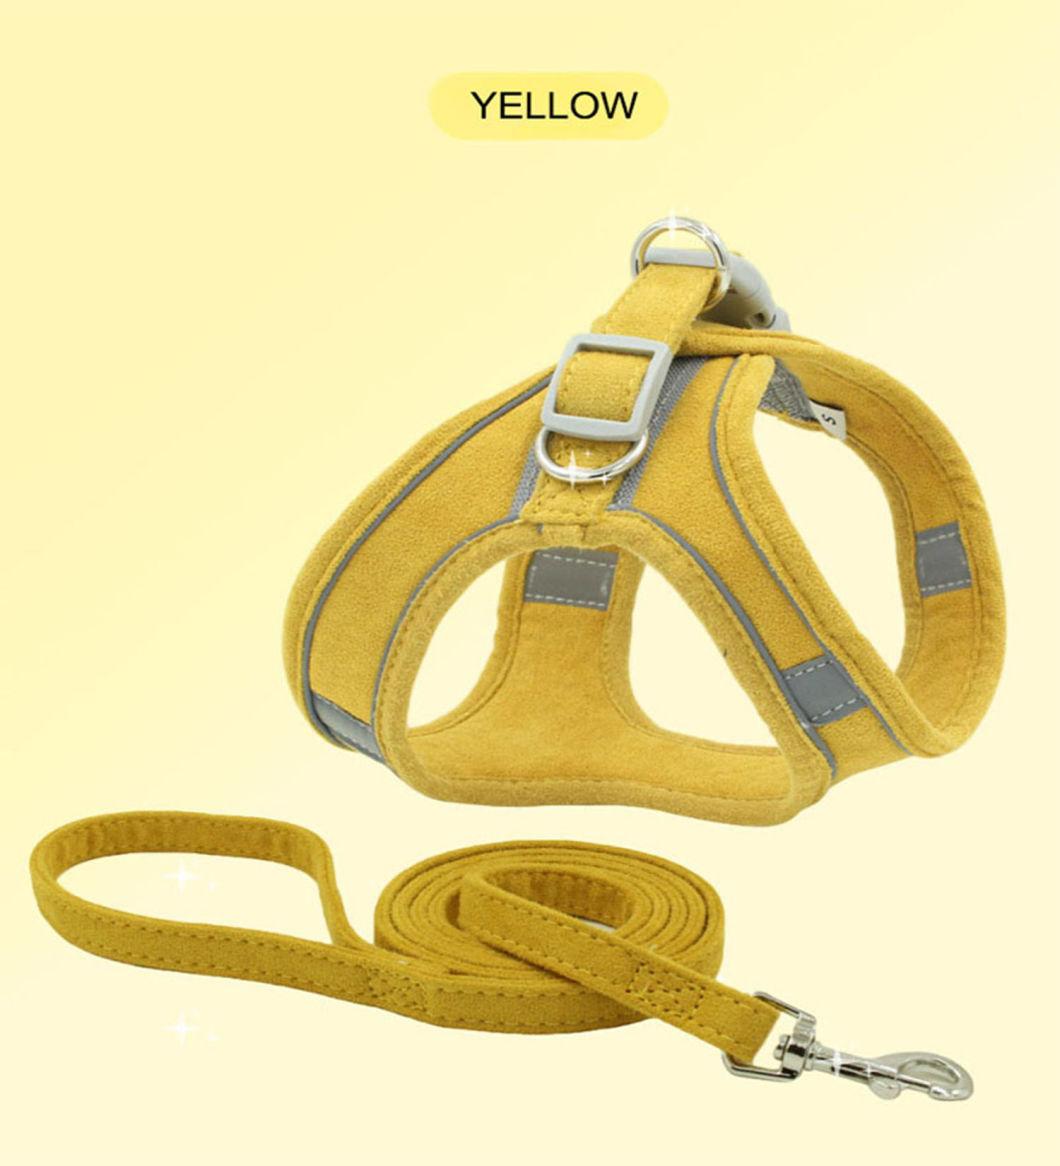 No Pull Pet Harness High Reflective Dog Harness Cat Harness with Pet Leash